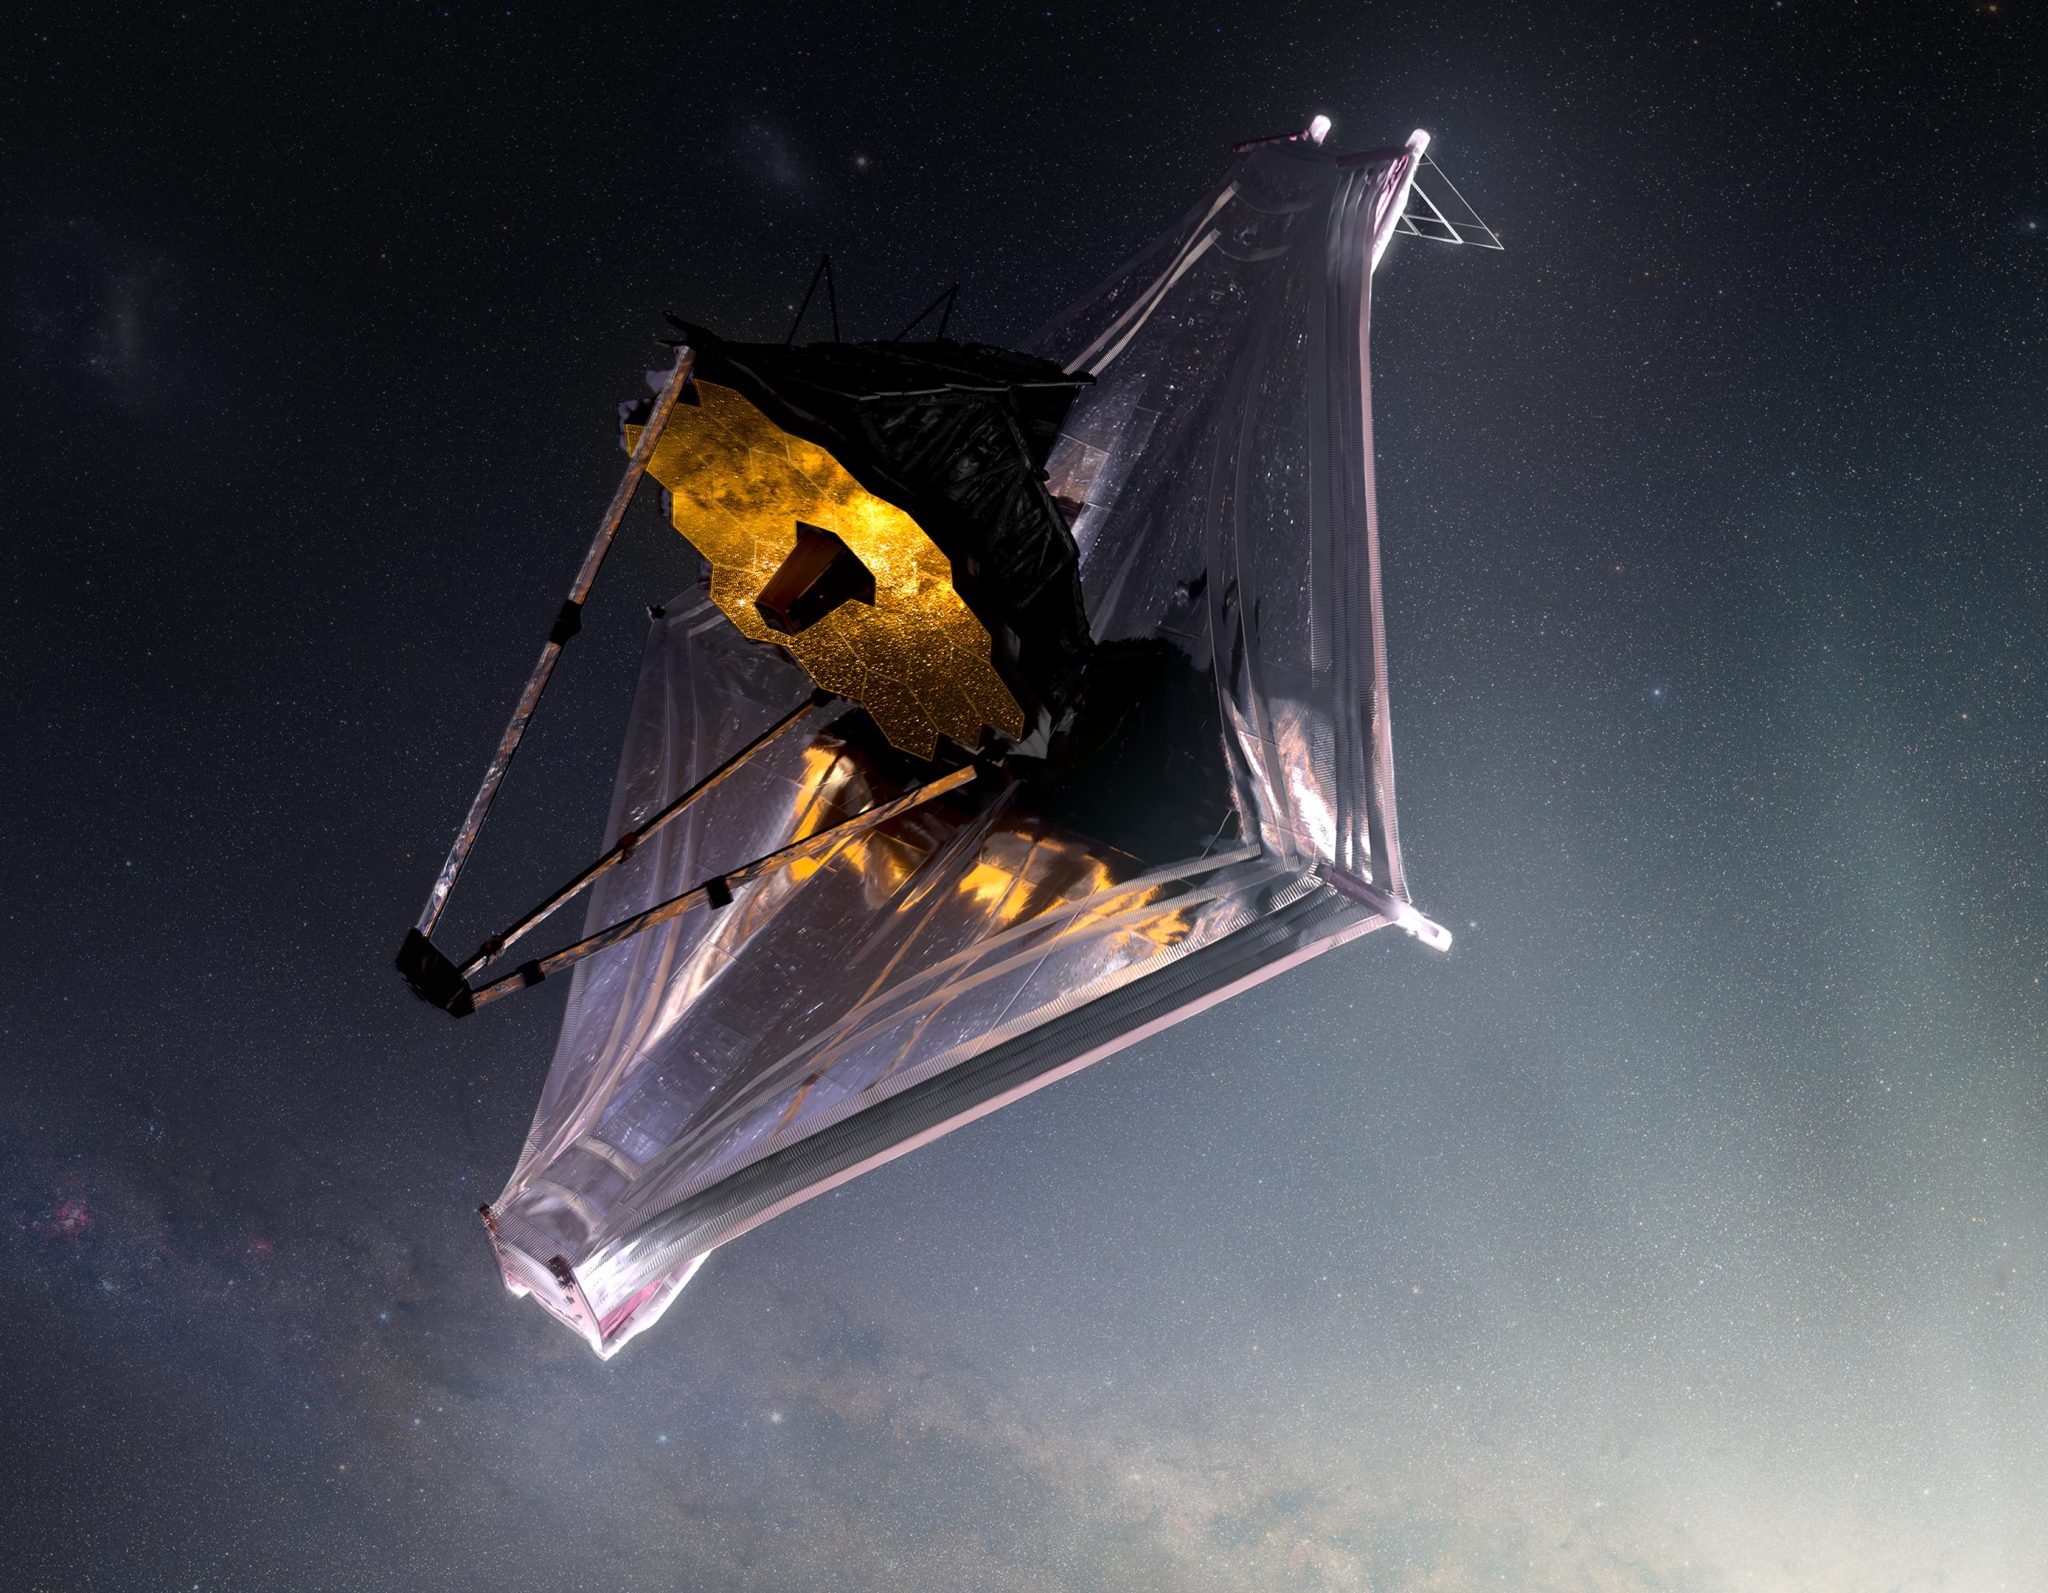 Artist's conception of the James Webb Space Telescope